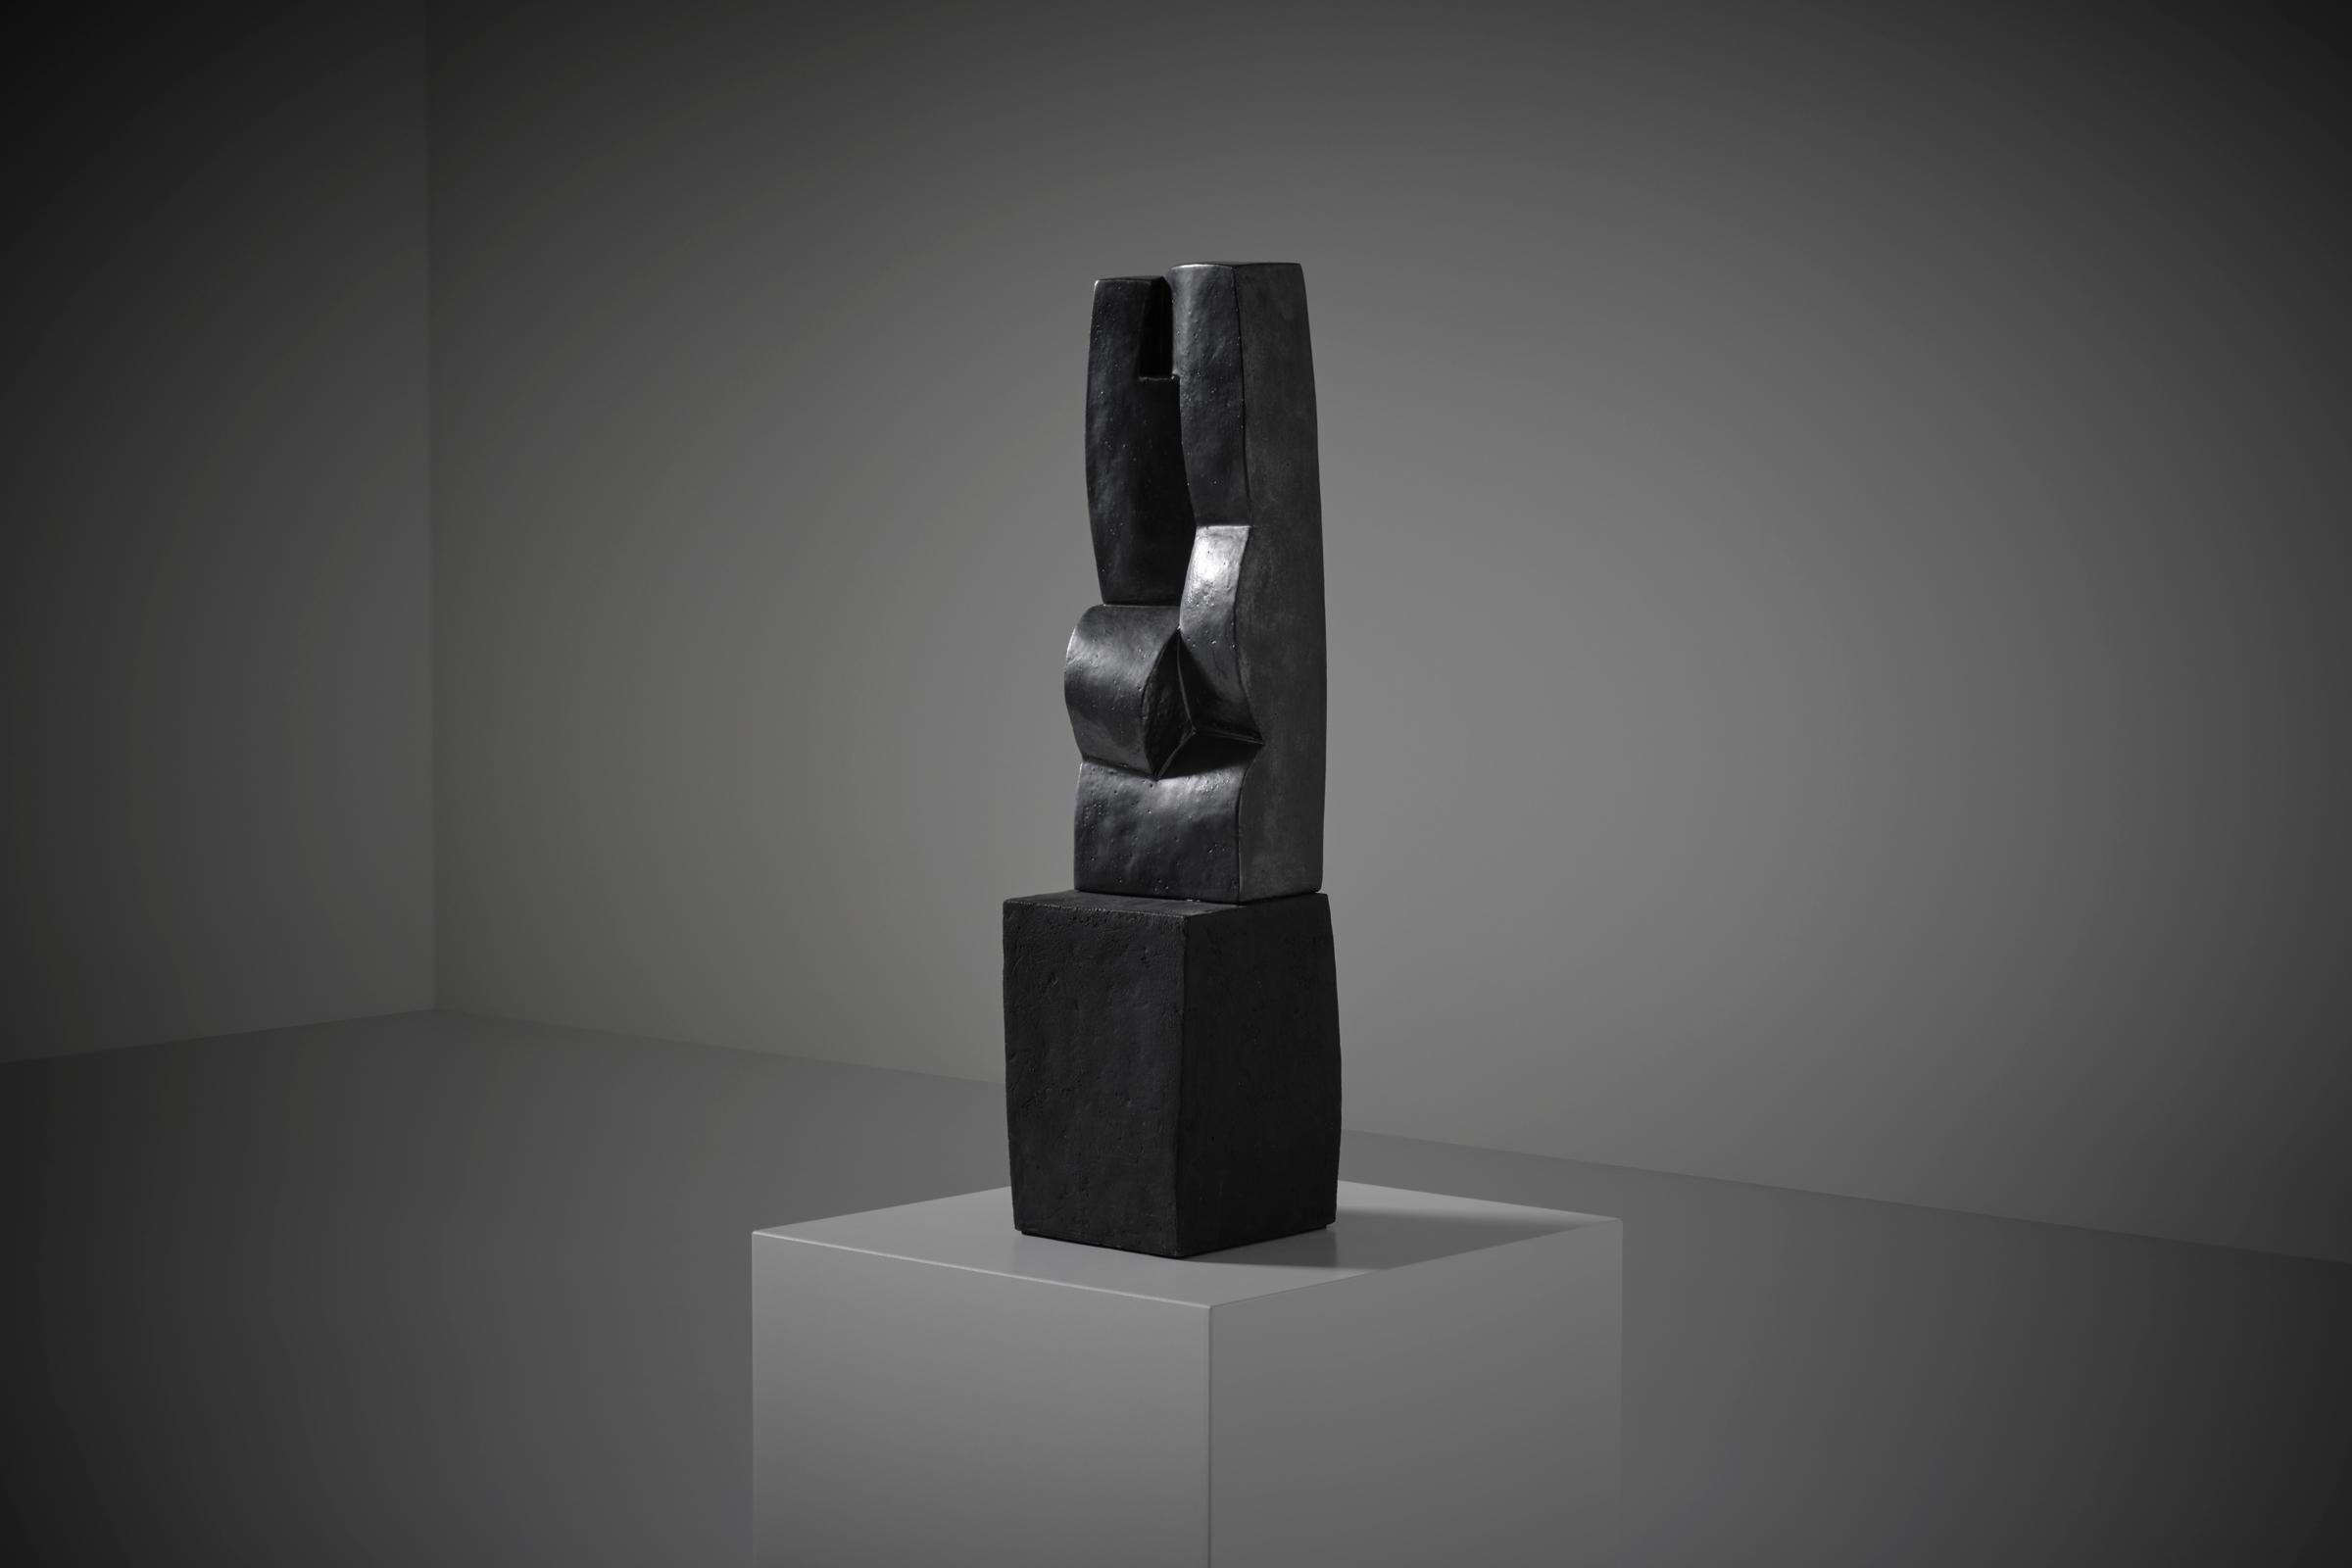 Unique Ceramic sculpture by Cor Dam (1935 -2019), the Netherlands 1970s. Beautiful abstract work showing strong interlocking cubistic shapes, finished in a glossy anthracite enamel. The irregular cubic 'base' is part of the sculpture and is finished